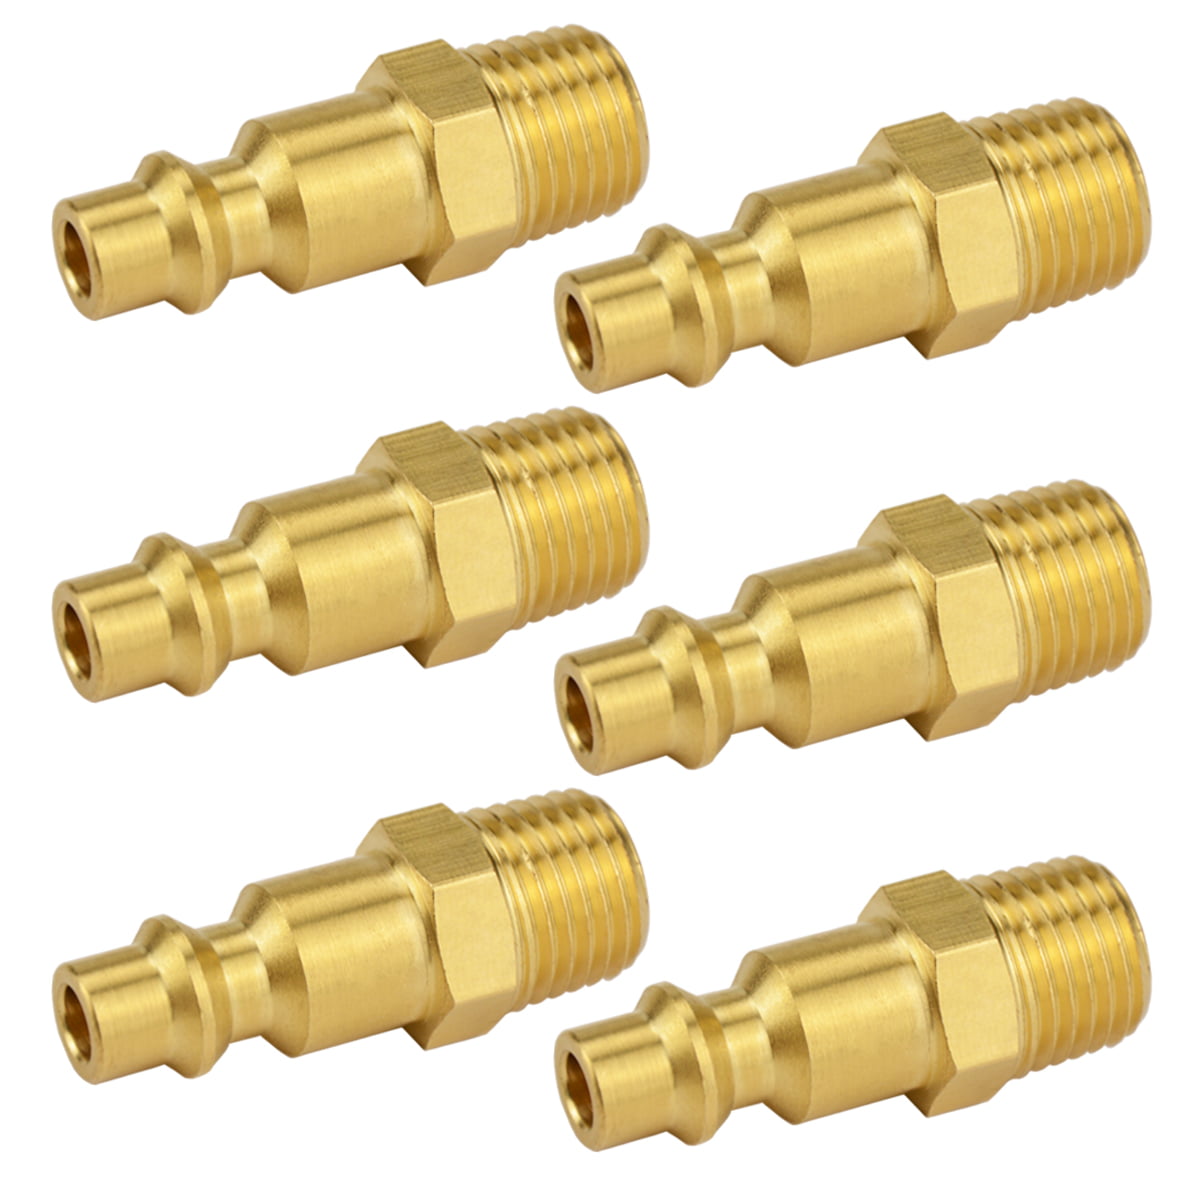 Brass 1/4 Inch NPT Female Air Hose Quick Connect Adapter Coupler And Plug Kit, 